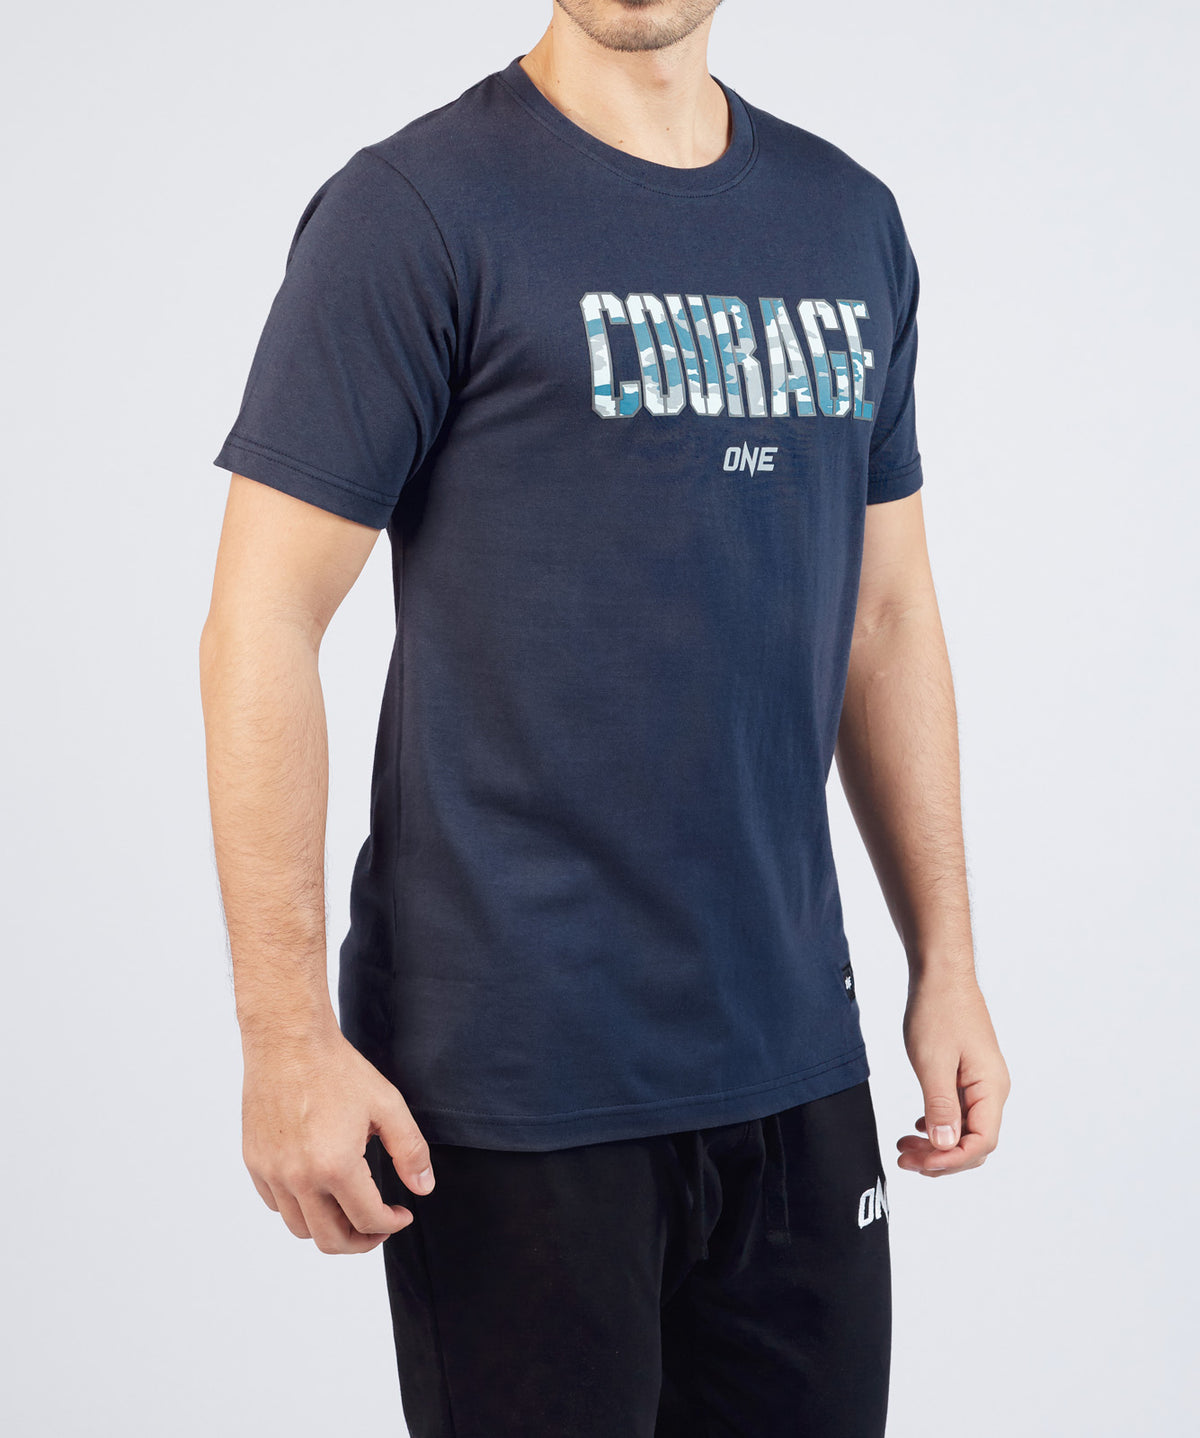 Courage Tee - ONE.SHOP | The Official Online Shop of ONE Championship